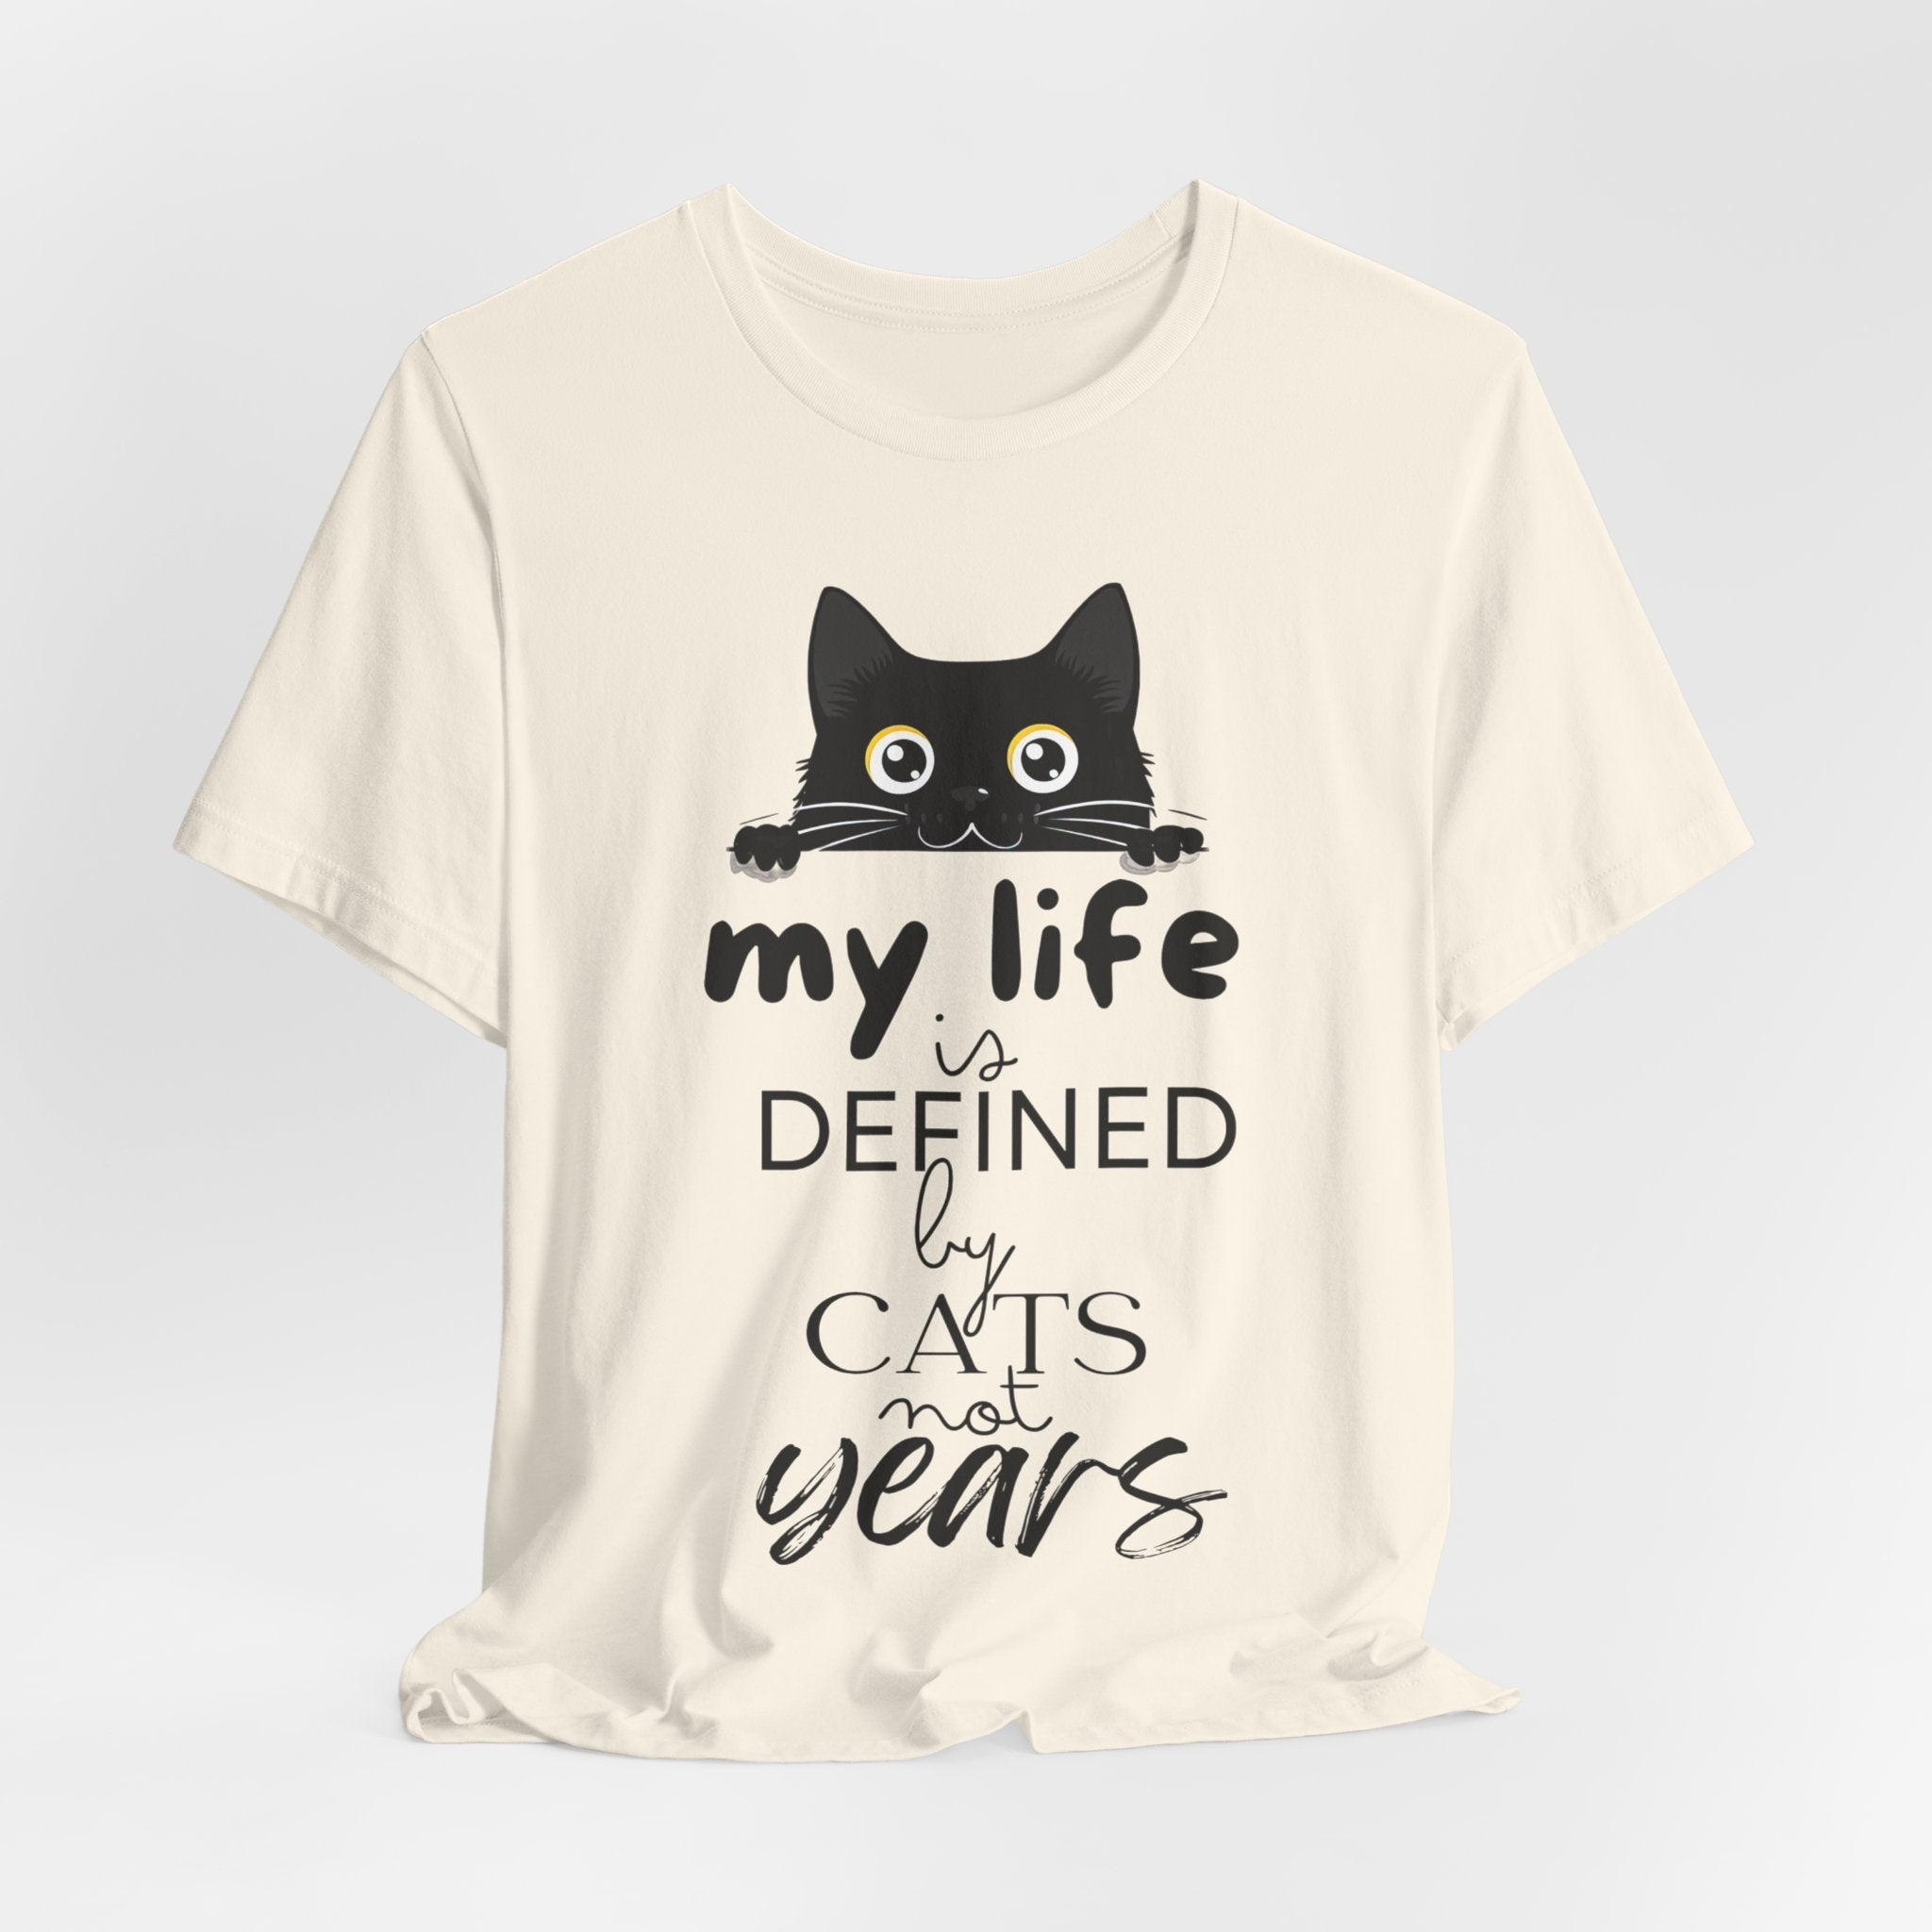 Black Cat T-Shirt - 'My Life is Defined by Cats Not Years' - Unique Cat Lover Tee - Gift for Cat Owners